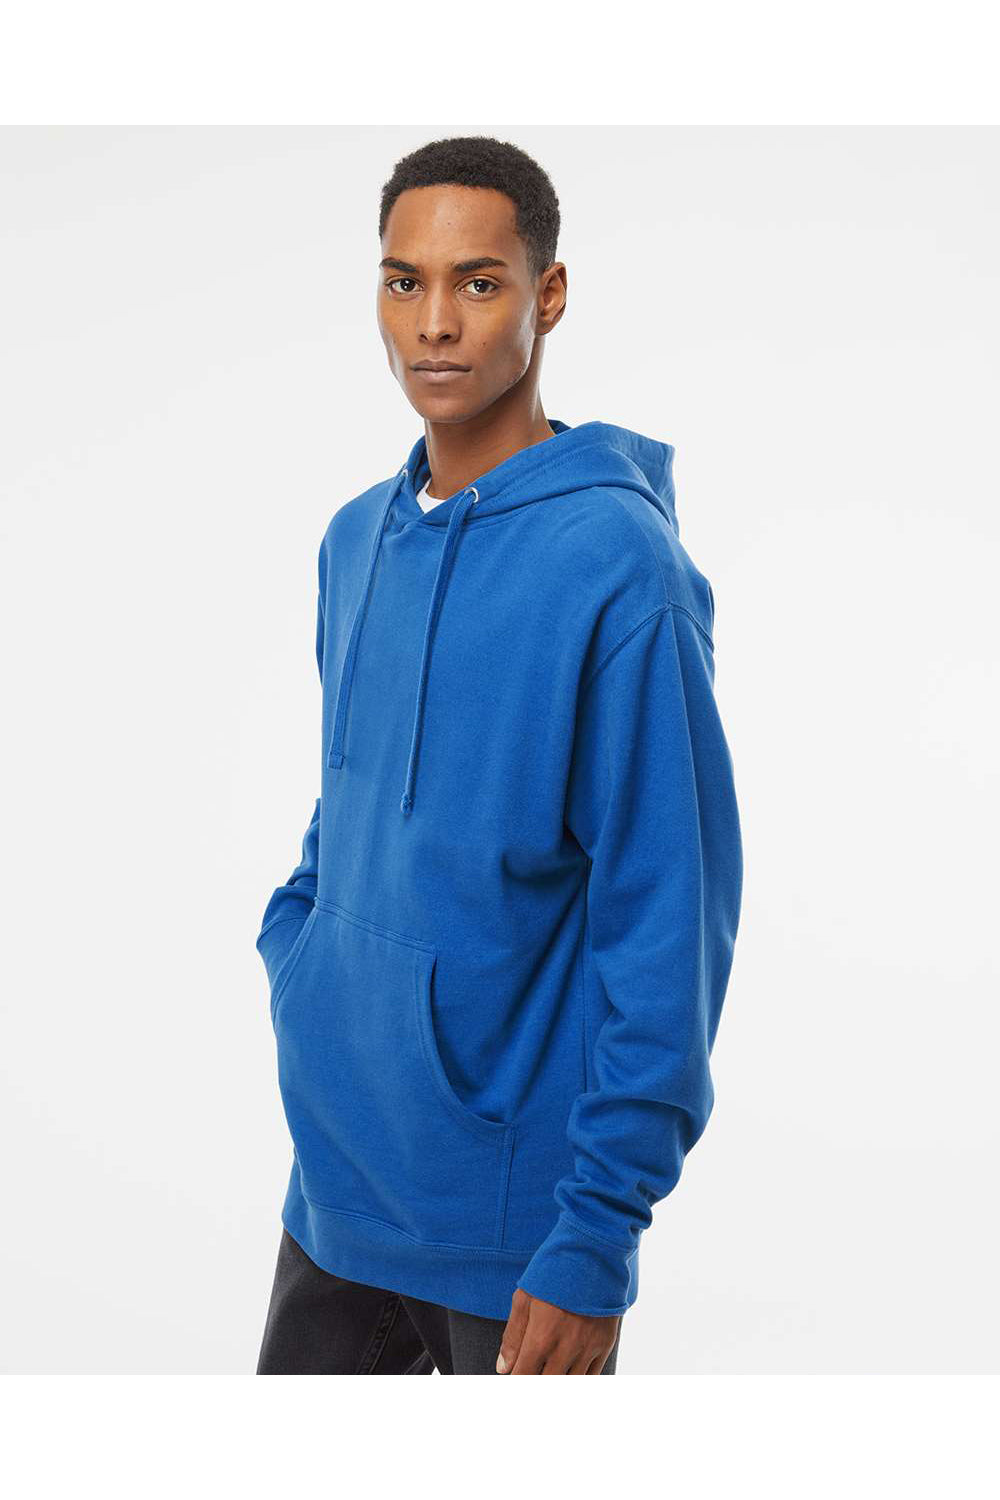 Independent Trading Co. SS4500 Mens Hooded Sweatshirt Hoodie Royal Blue Model Side